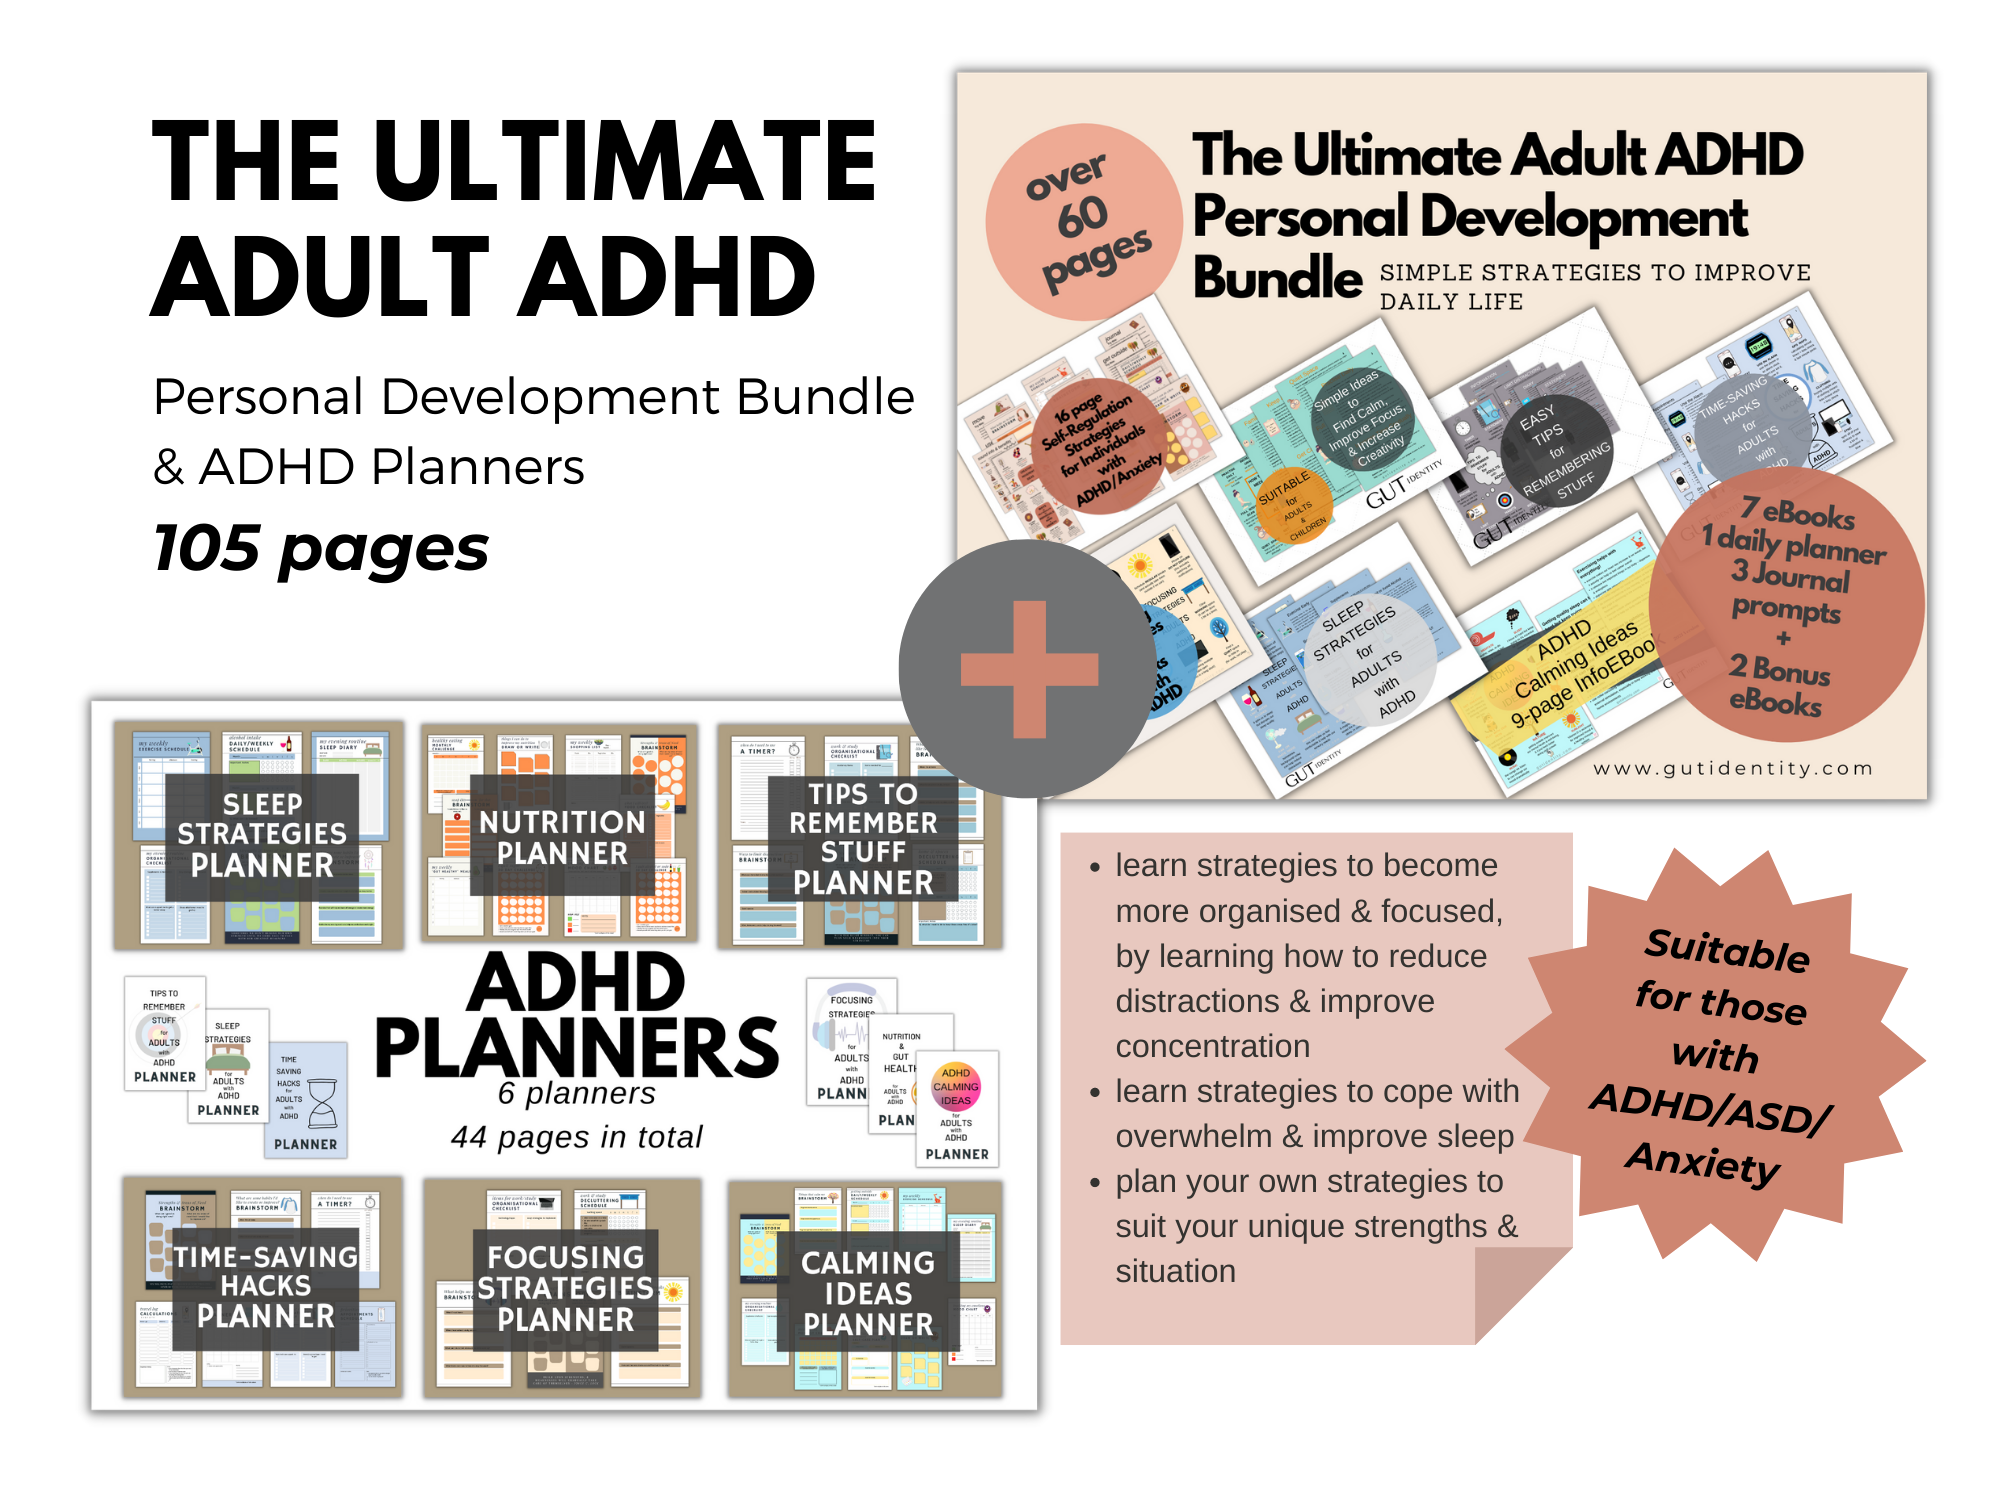 Adult ADHD Personal Development Life-Skills workbook and planners by Gutidentity